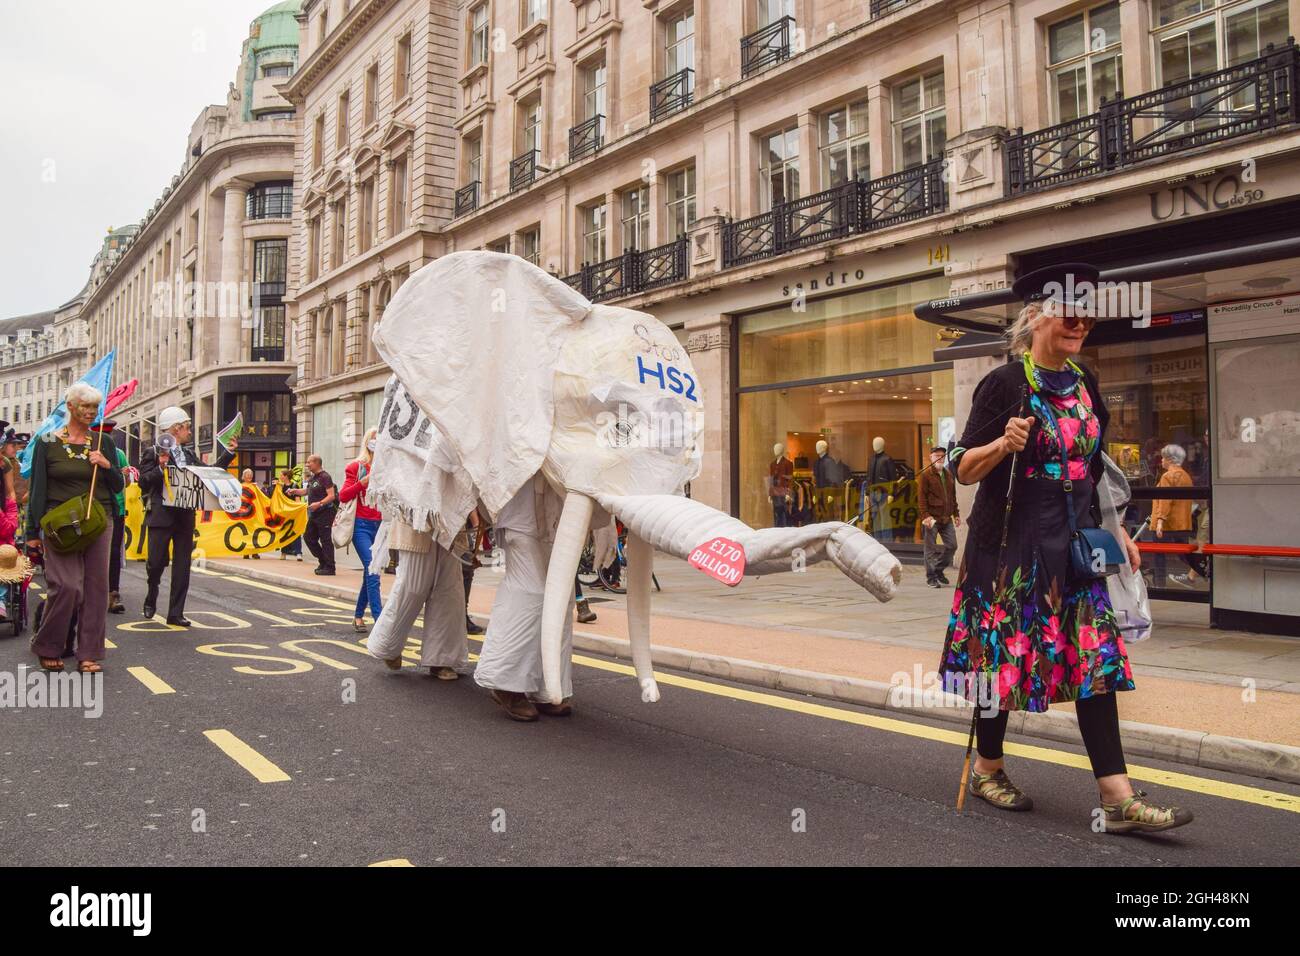 London, UK. 04th Sep, 2021. Protesters wear a white elephant costume in opposition to HS2 (High Speed 2 railway system) during the demonstration in Regent Street.Extinction Rebellion protesters staged the March For Nature on the final day of their two-week Impossible Rebellion campaign, calling on the UK Government to act meaningfully on the climate and ecological crisis. Credit: SOPA Images Limited/Alamy Live News Stock Photo